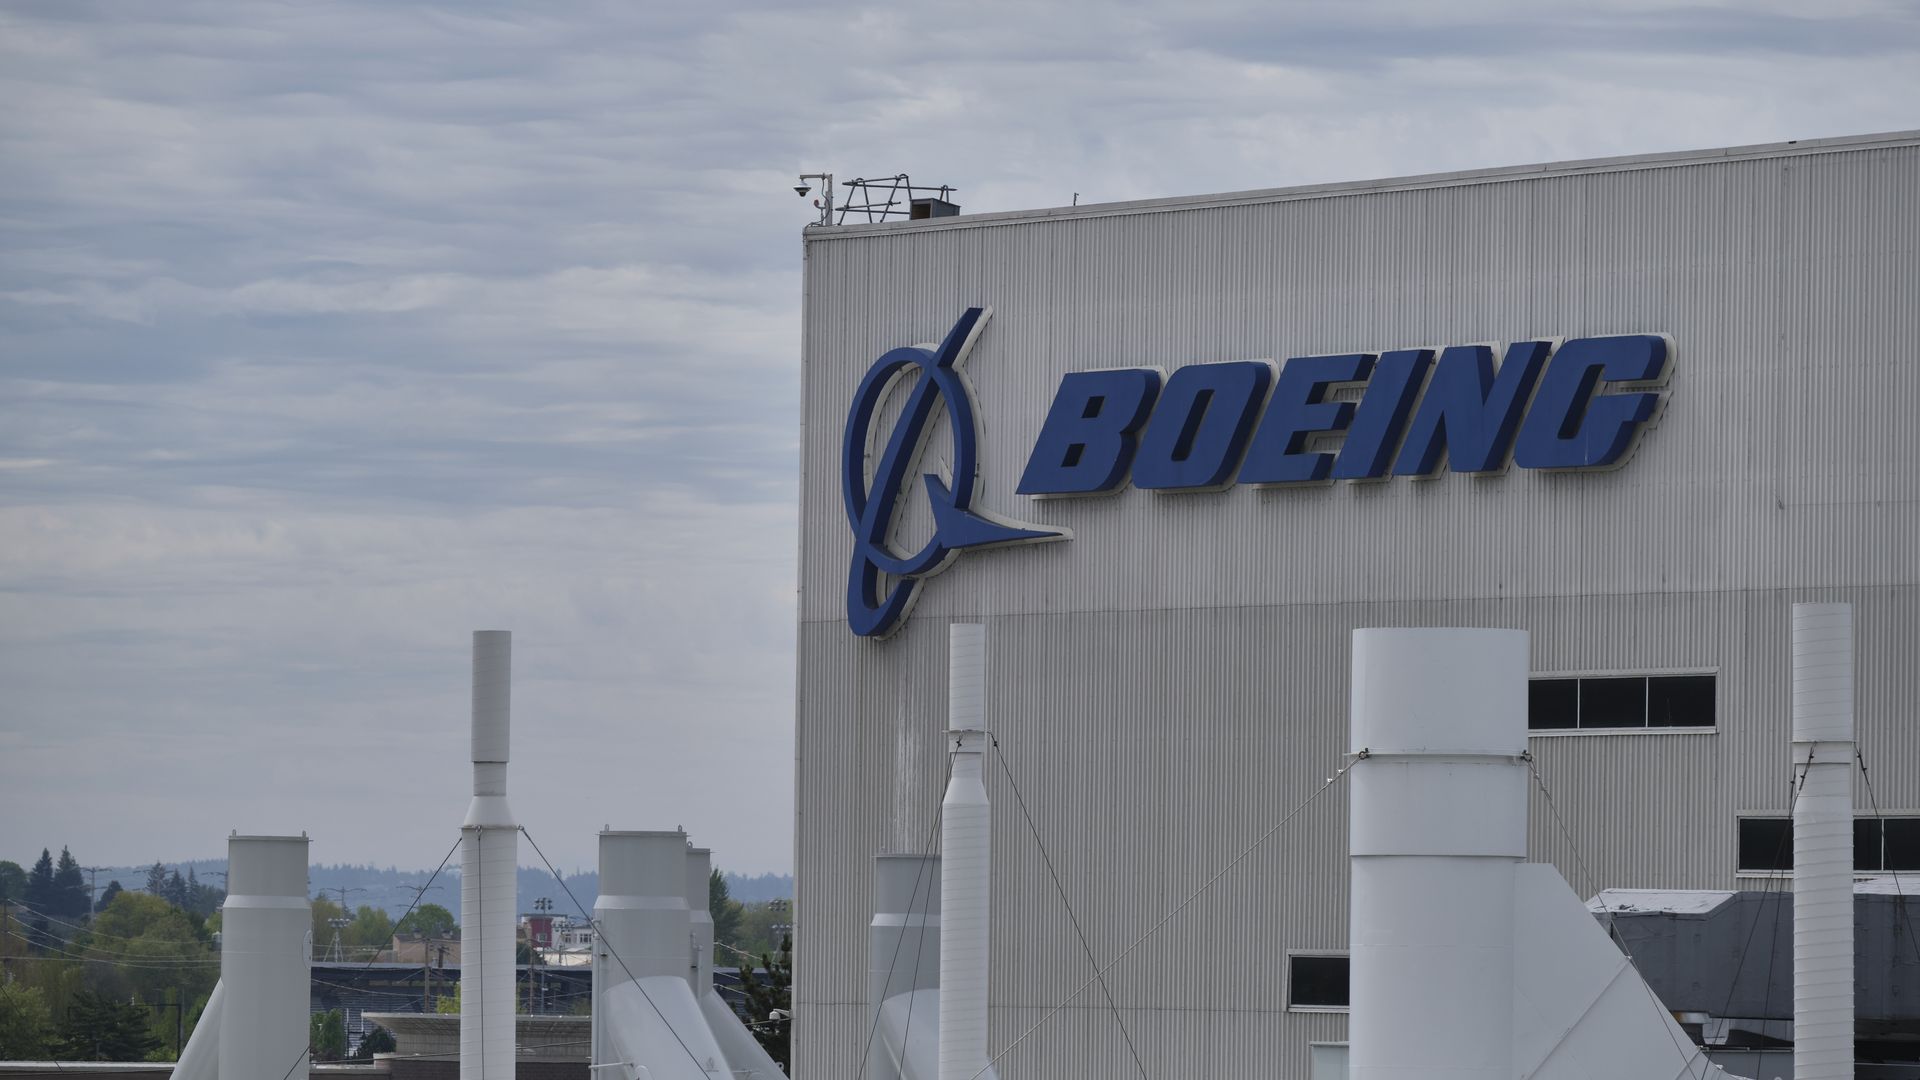  In this image, the Boeing logo is visible on the side of a building